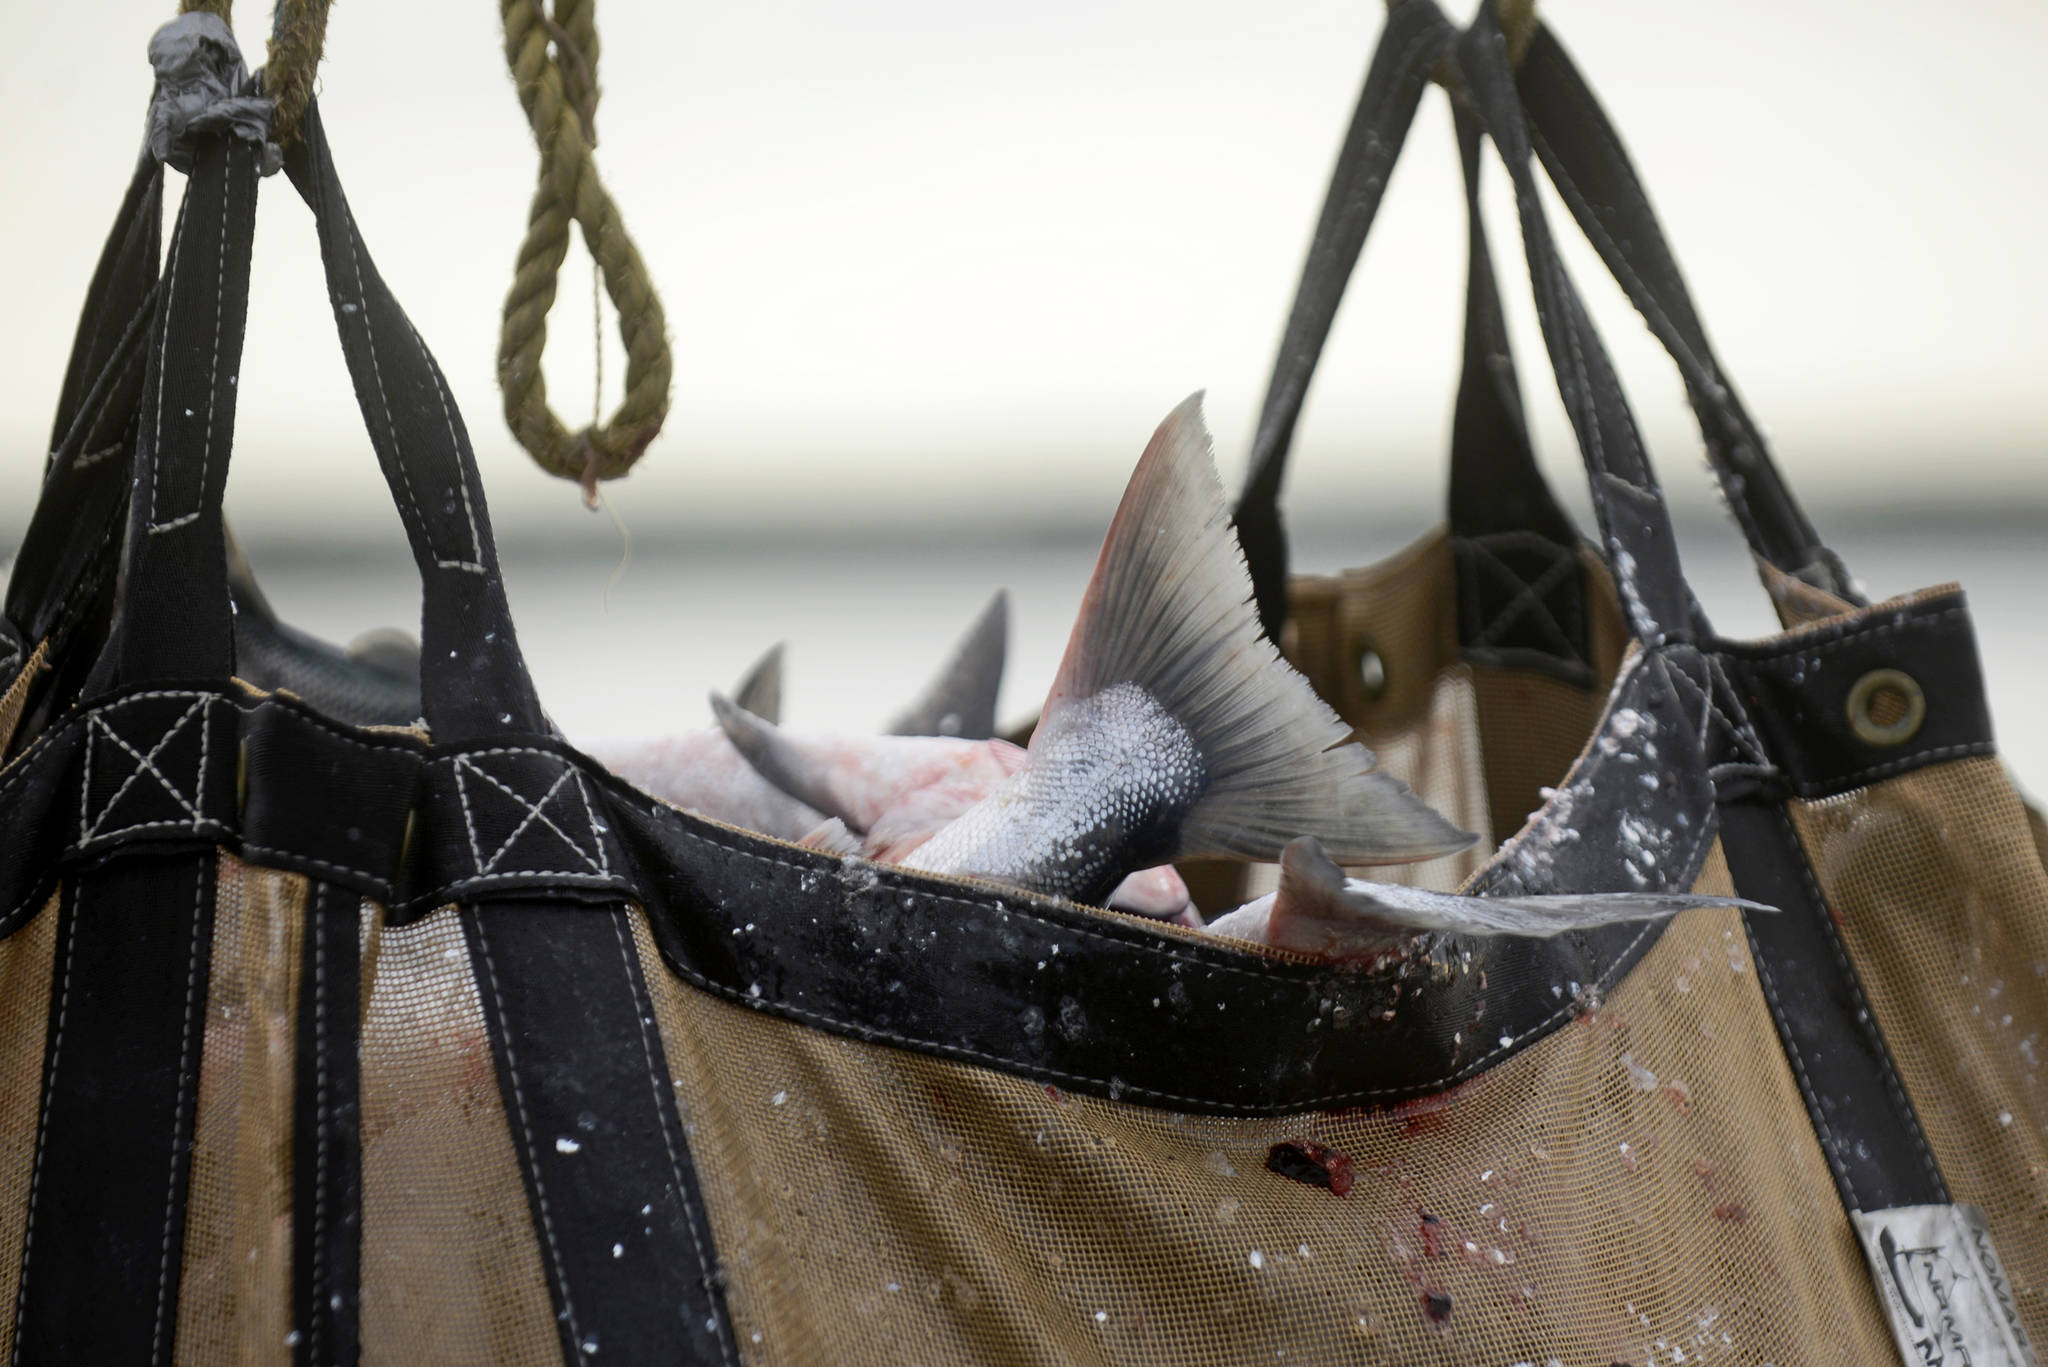 A brailer bag full of commercially-caught salmon is hoisted up to the Snug Harbor Seafoods dock for processing on Thursday, July 12, 2018 in Kenai, Alaska. On Tuesday the Alaska Department of Fish and Game downgraded its estimated Kenai River sockeye run from 2.5 million fish to less than 2.3 million, changing some of the management procedures for commercial fishing in Upper Cook Inlet. (Photo by Ben Boettger/Peninsula Clarion)